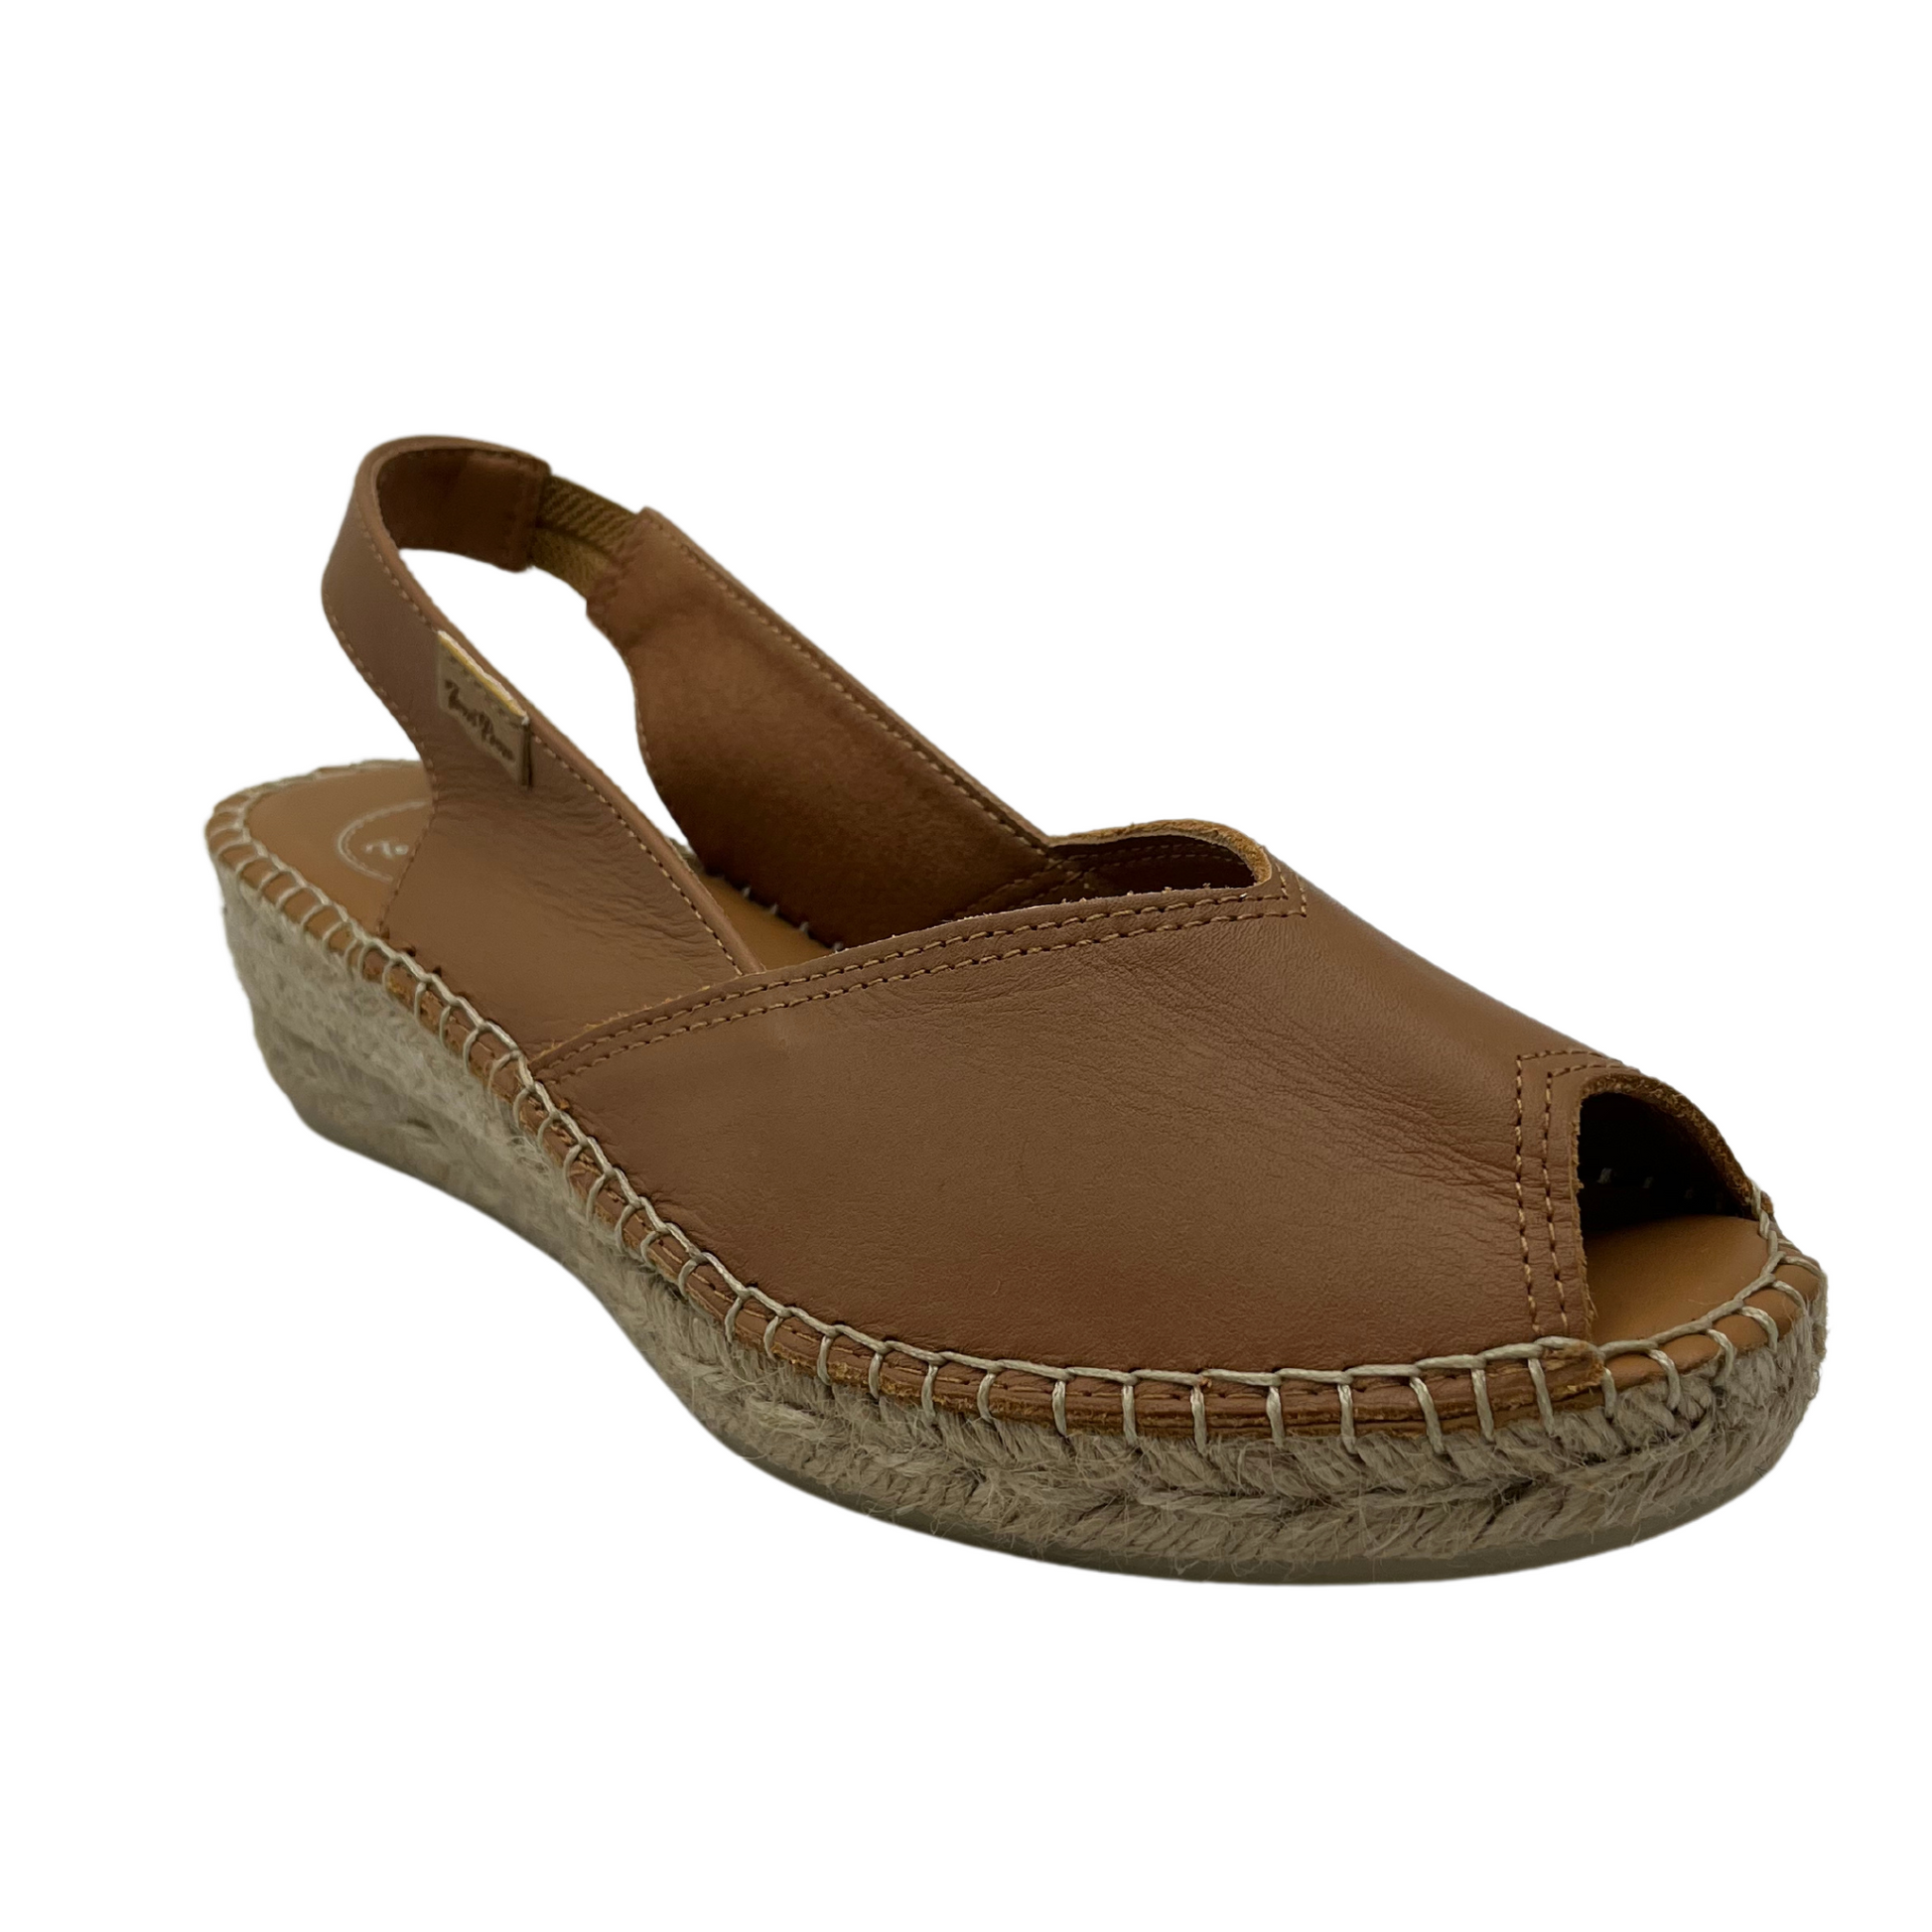 45 degree angled view of tan leather wedge espadrille